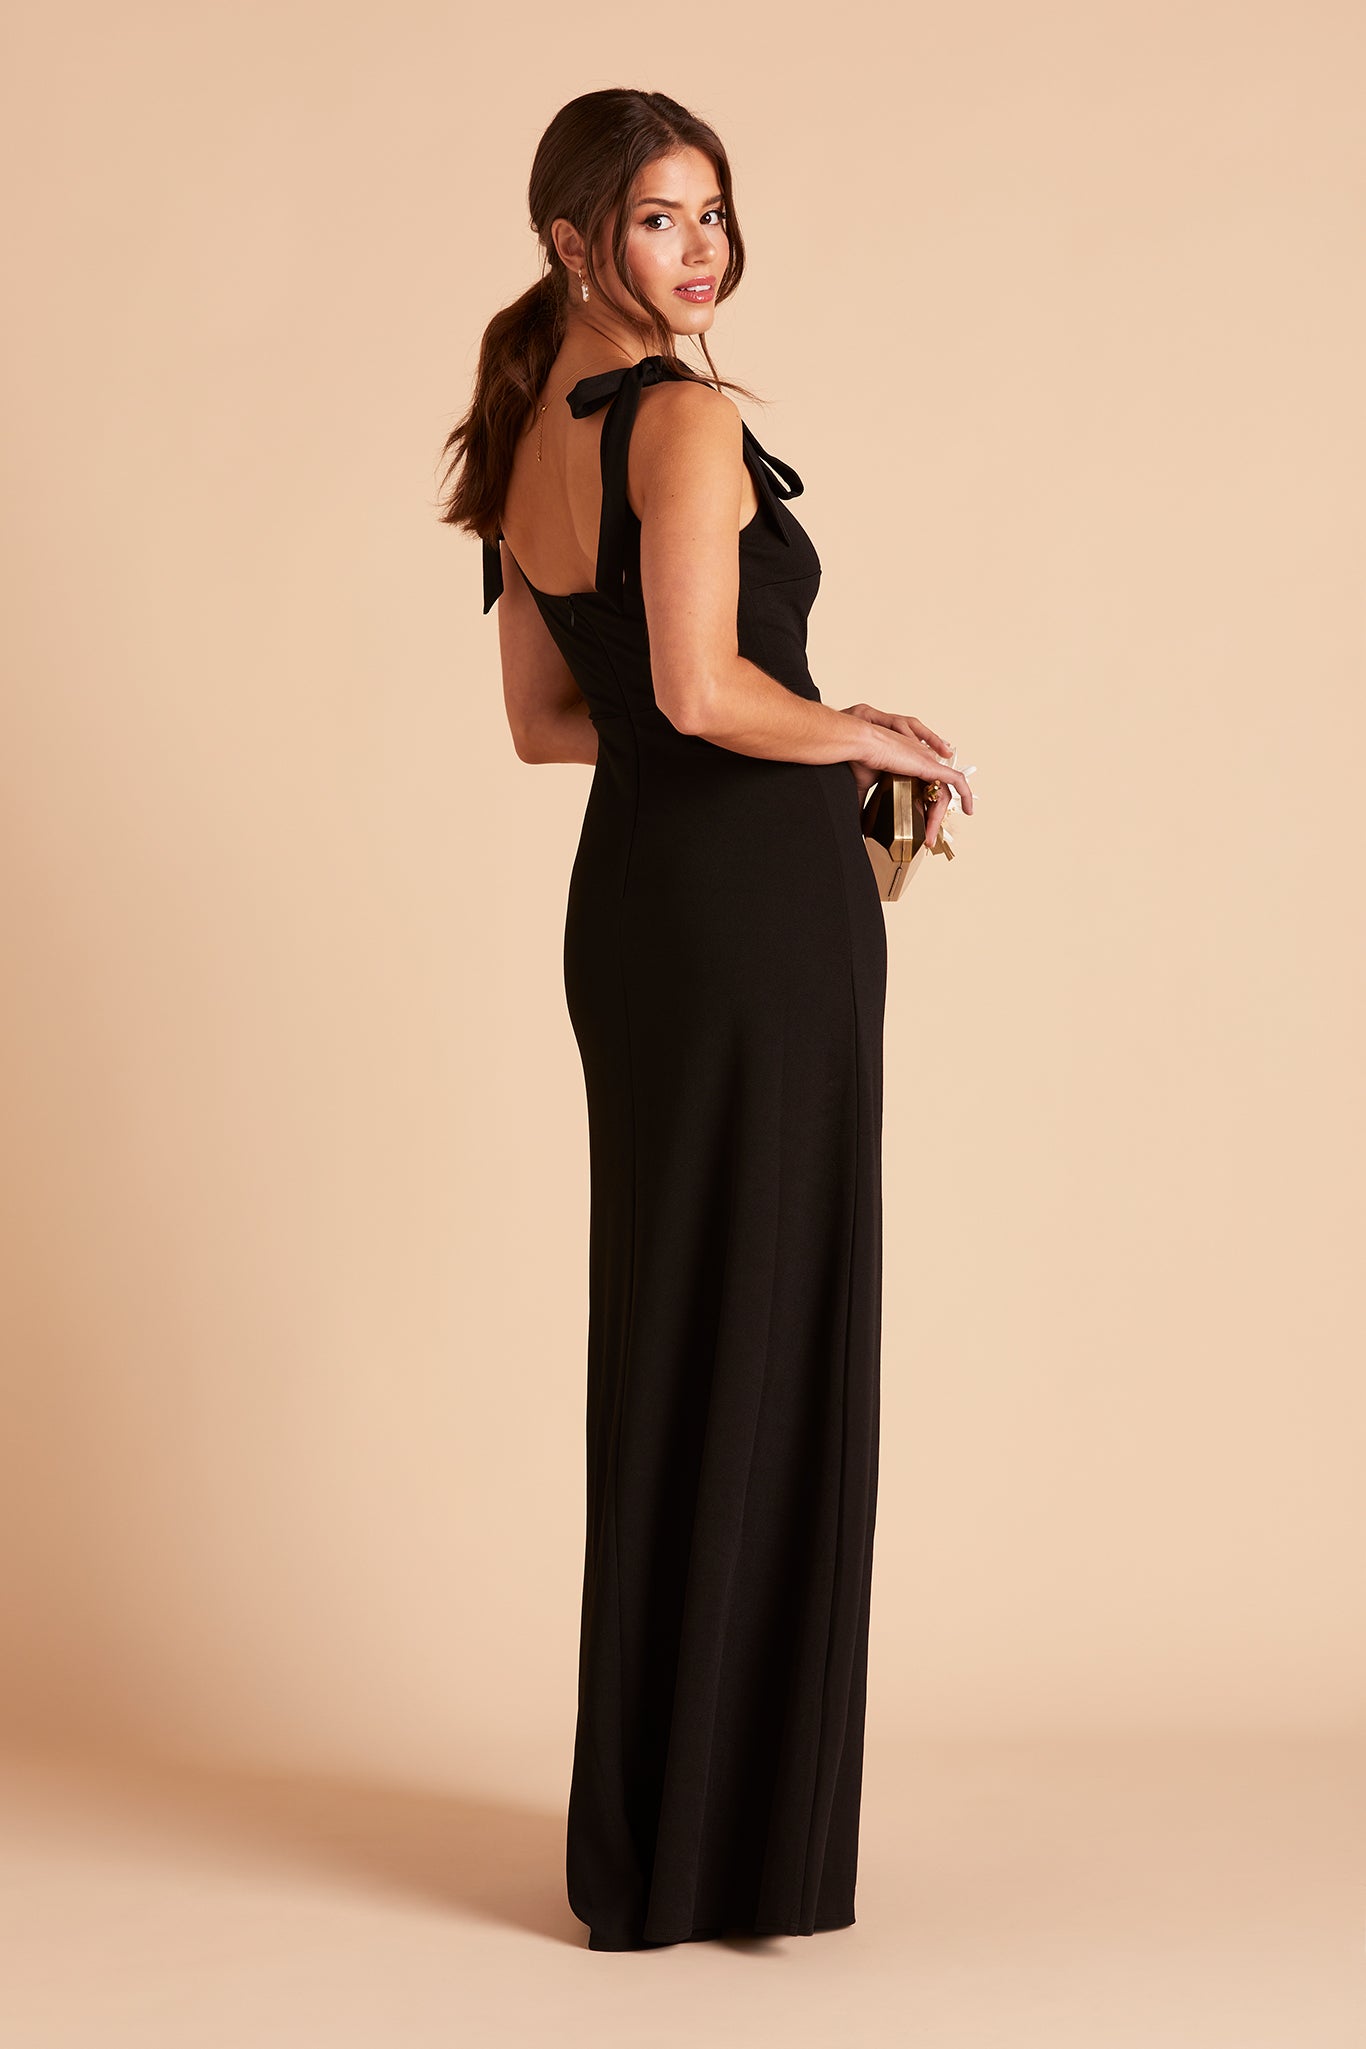 Side view of the Alex Convertible Bridesmaid Dress in black crepe with shoulder ties reveals a slender silhouette with the skirt flowing delicately from the waistline to the floor.